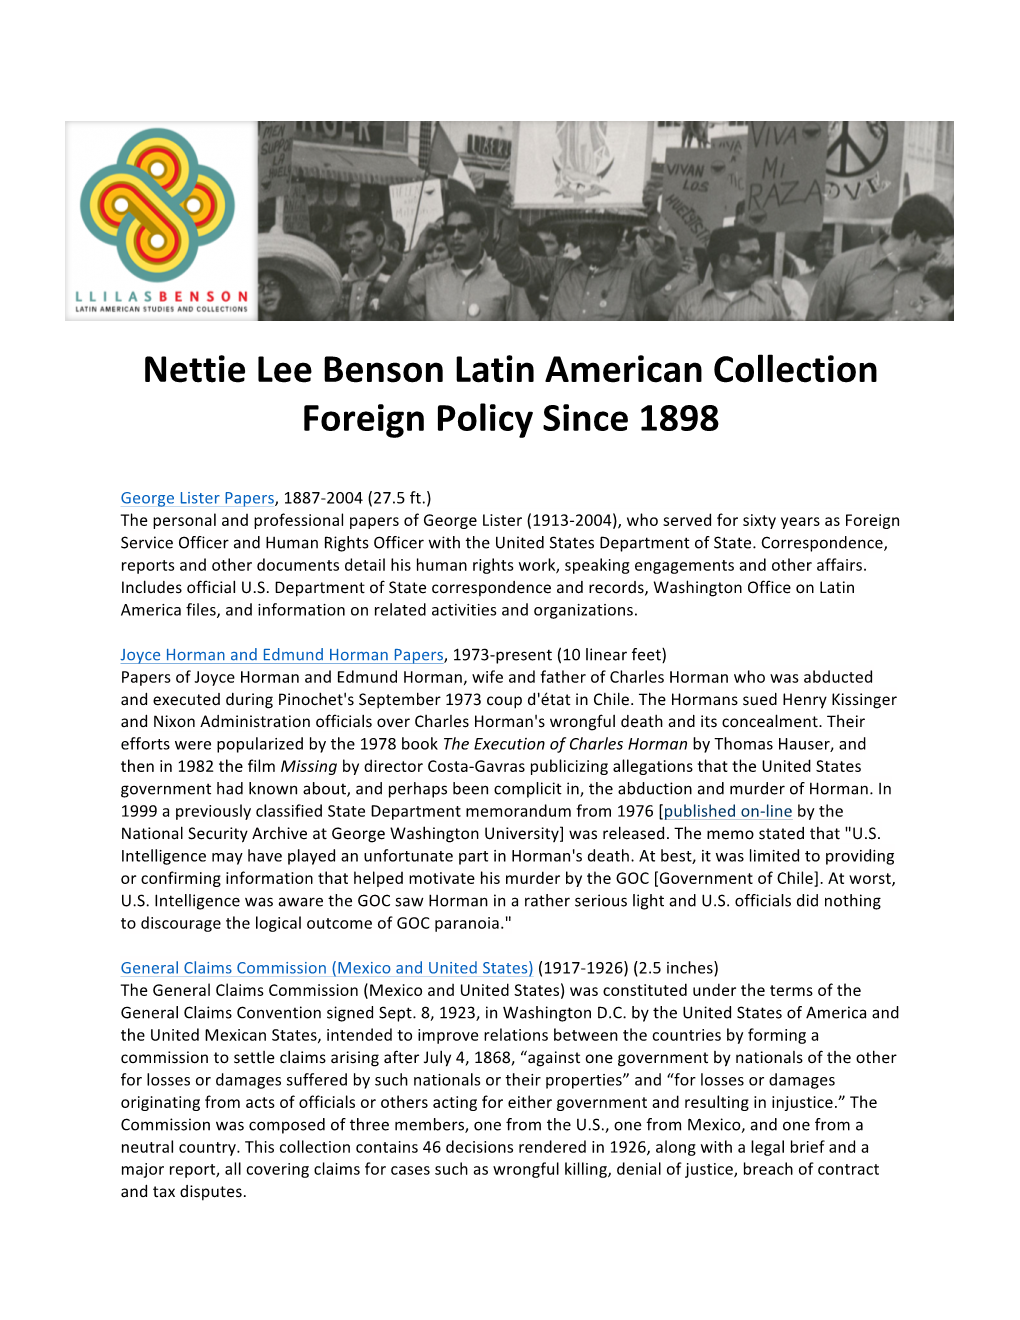 Nettie Lee Benson Latin American Collection Foreign Policy Since 1898